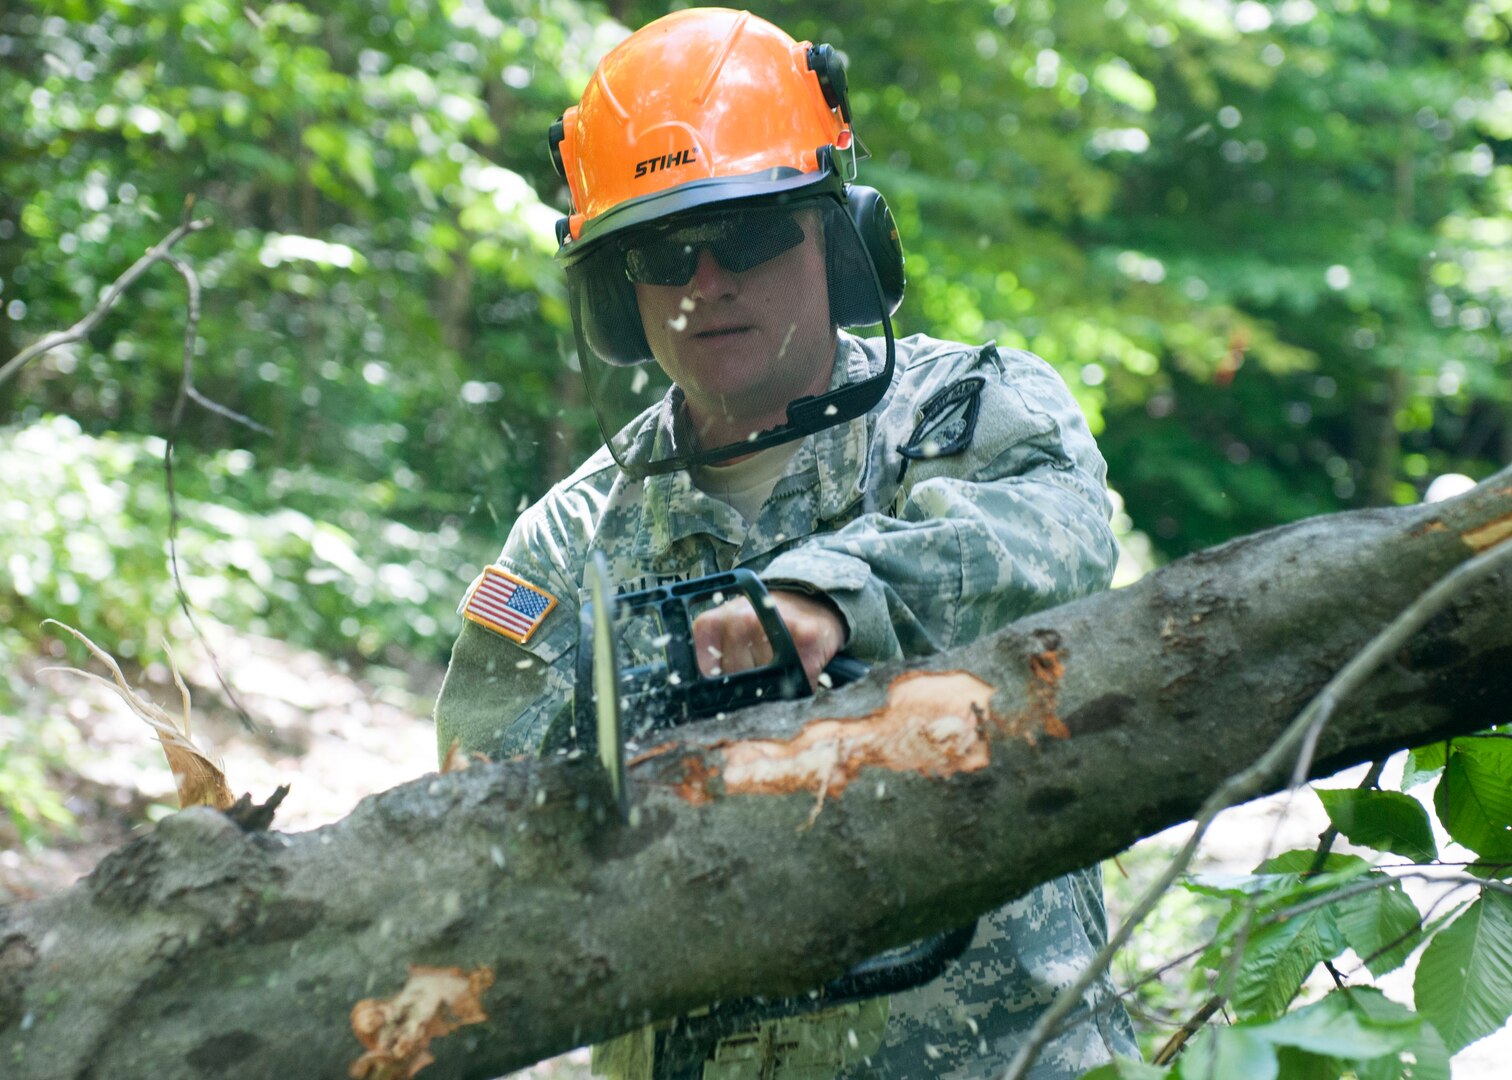 Sgt. Jason Allen, chainsaw operator and bandsman, 40th Army Band, cuts through trees that block a road during quick reaction force training at Camp Ethan Allen Training Site, July 31, 2015, Jericho, Vermont. Allen is wearing protective gear including ear protection.